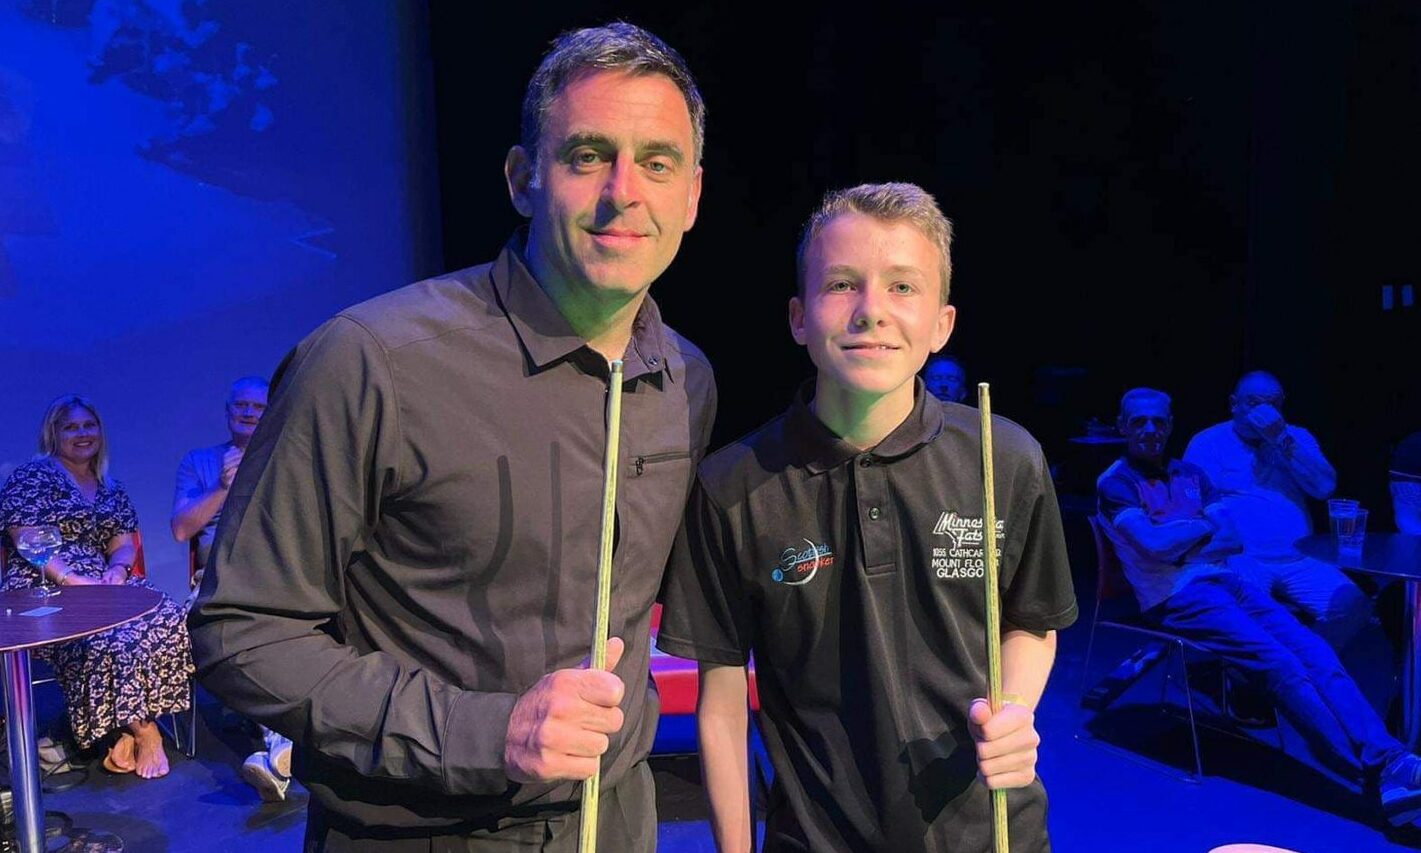 Snooker prodigy from Fife stars against Ronnie OSullivan in Dundee